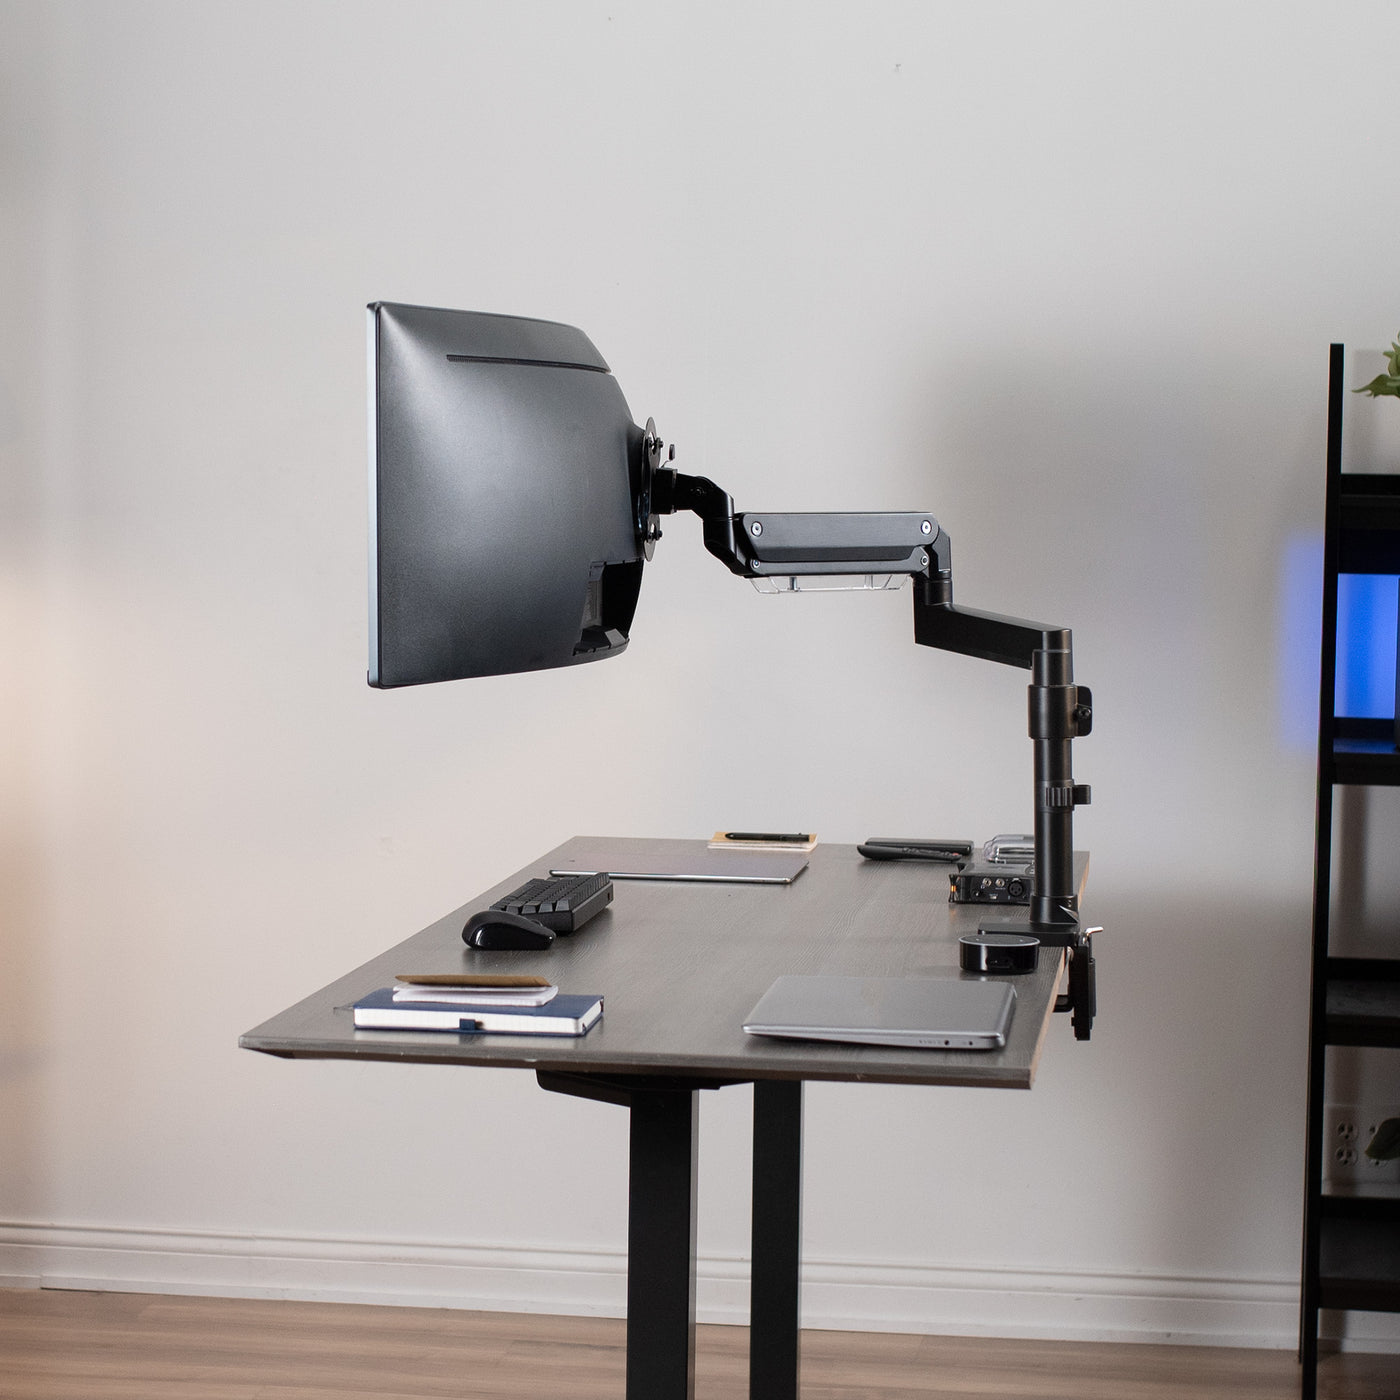 Ergotron LX Ultrawide Monitor Stand Setup and Review ¦ You NEED